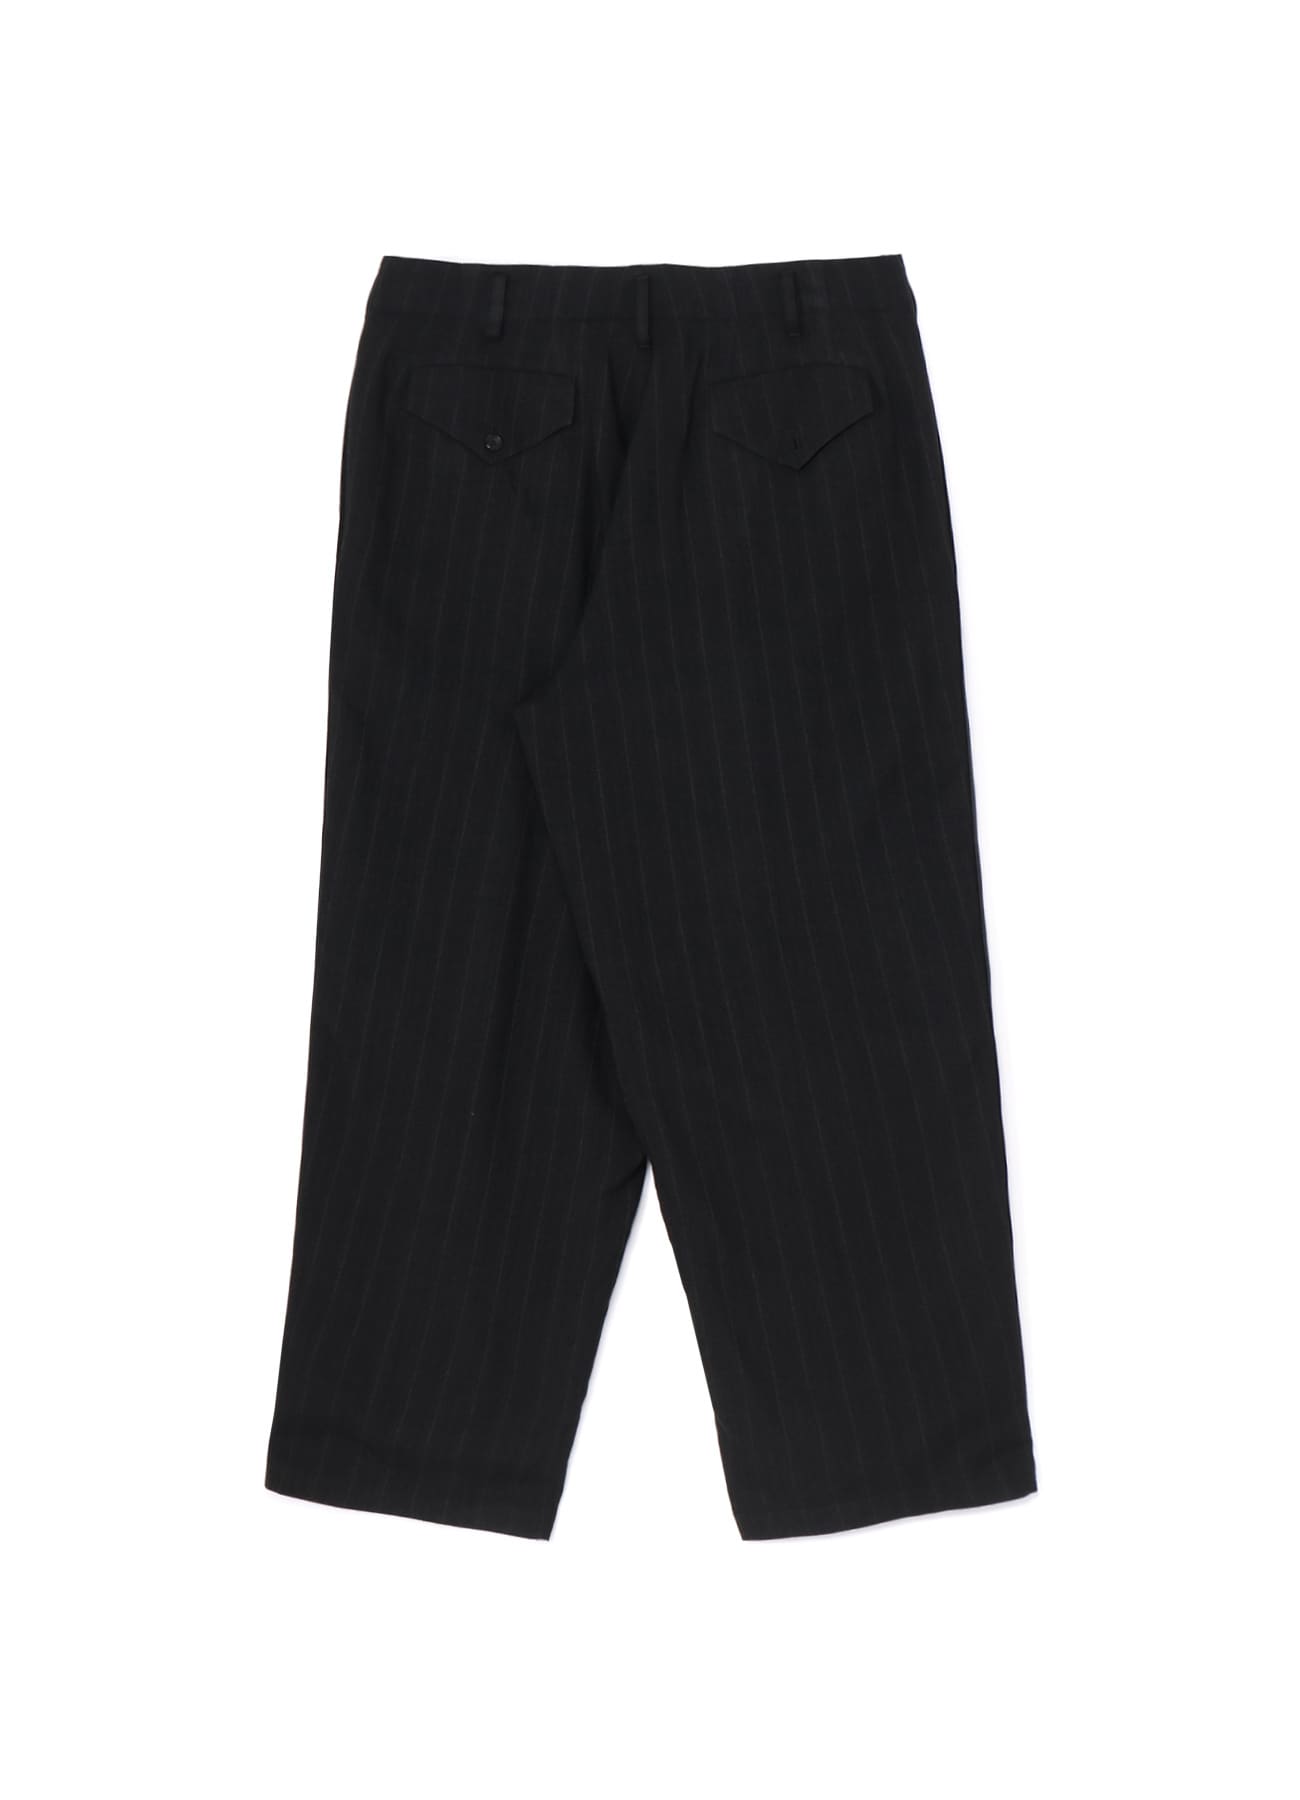 RAYON STRIPE PANTS WITH SIDE TAPE